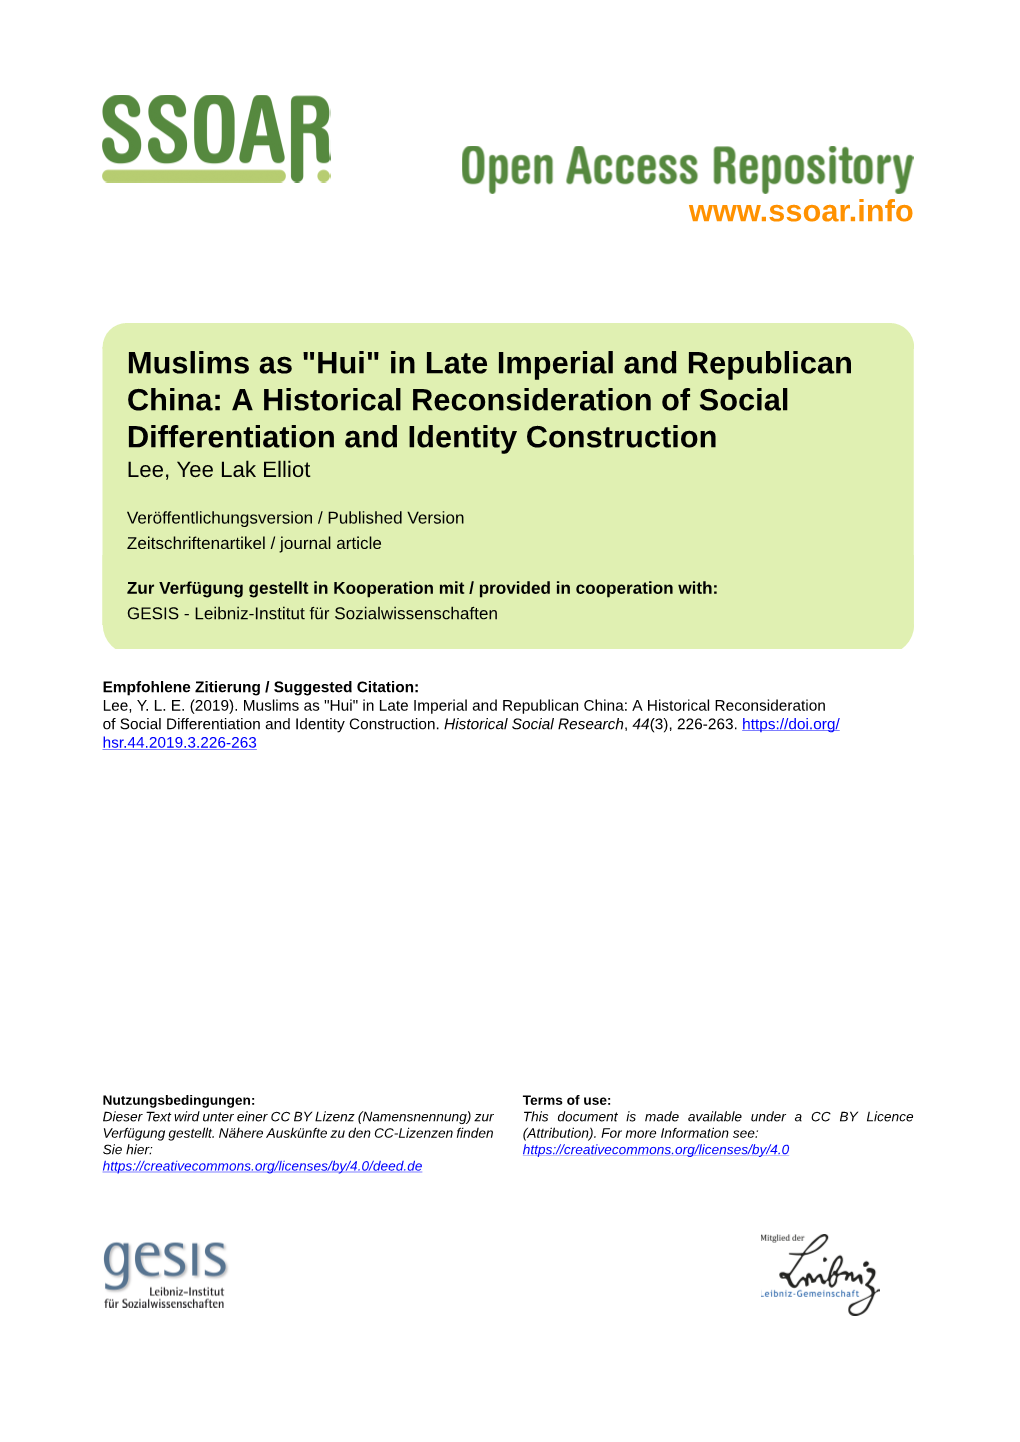 Muslims As "Hui" in Late Imperial and Republican China: a Historical Reconsideration of Social Differentiation and Identity Construction Lee, Yee Lak Elliot